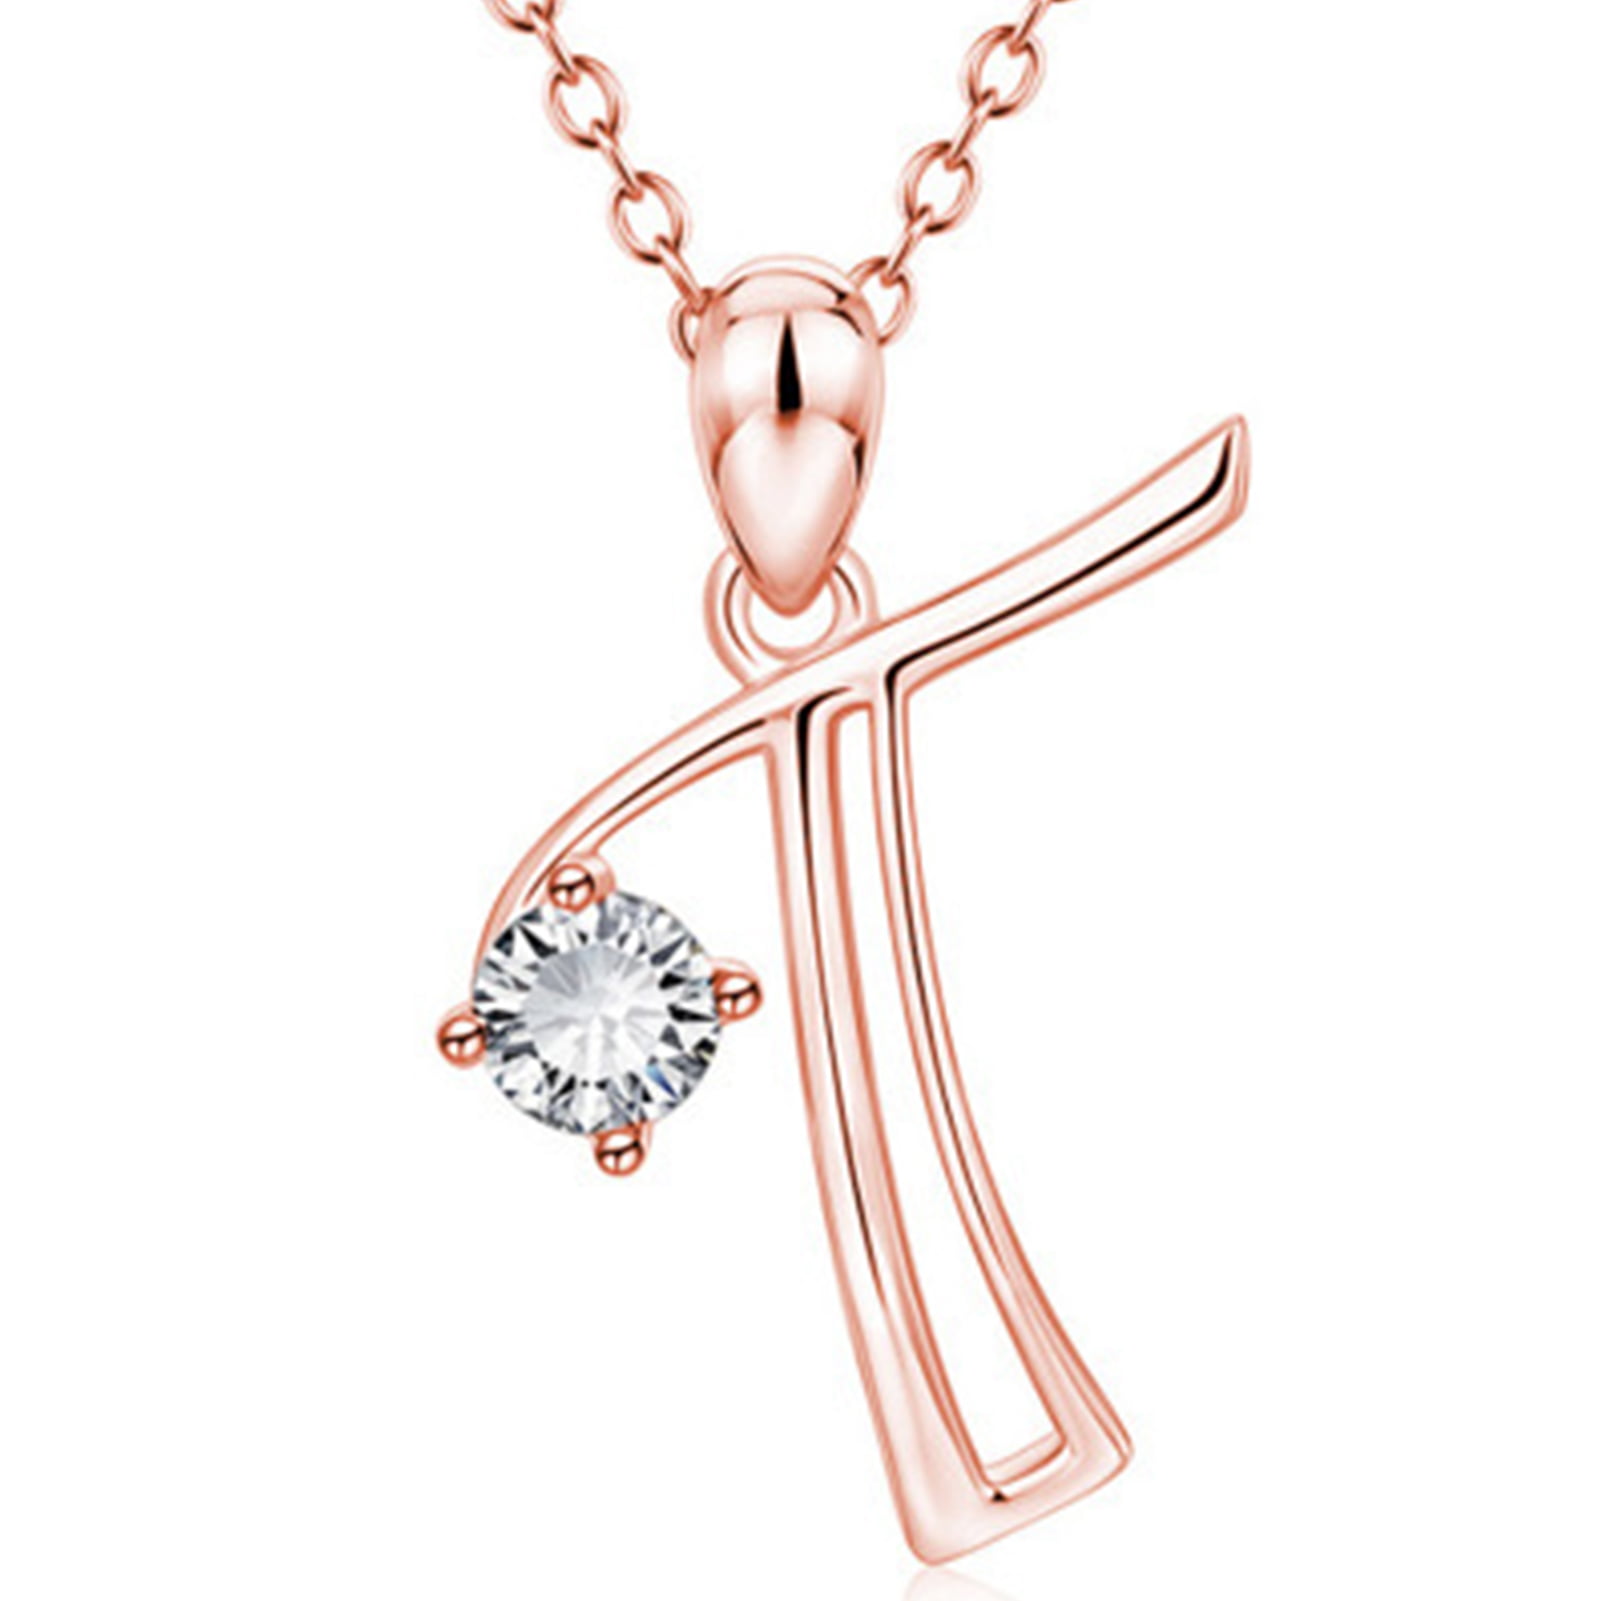 18 Solid 18K White Gold Chain Carleen Solid 18K White Gold Pink and White CZ Key Pendant Necklace for Women Girls